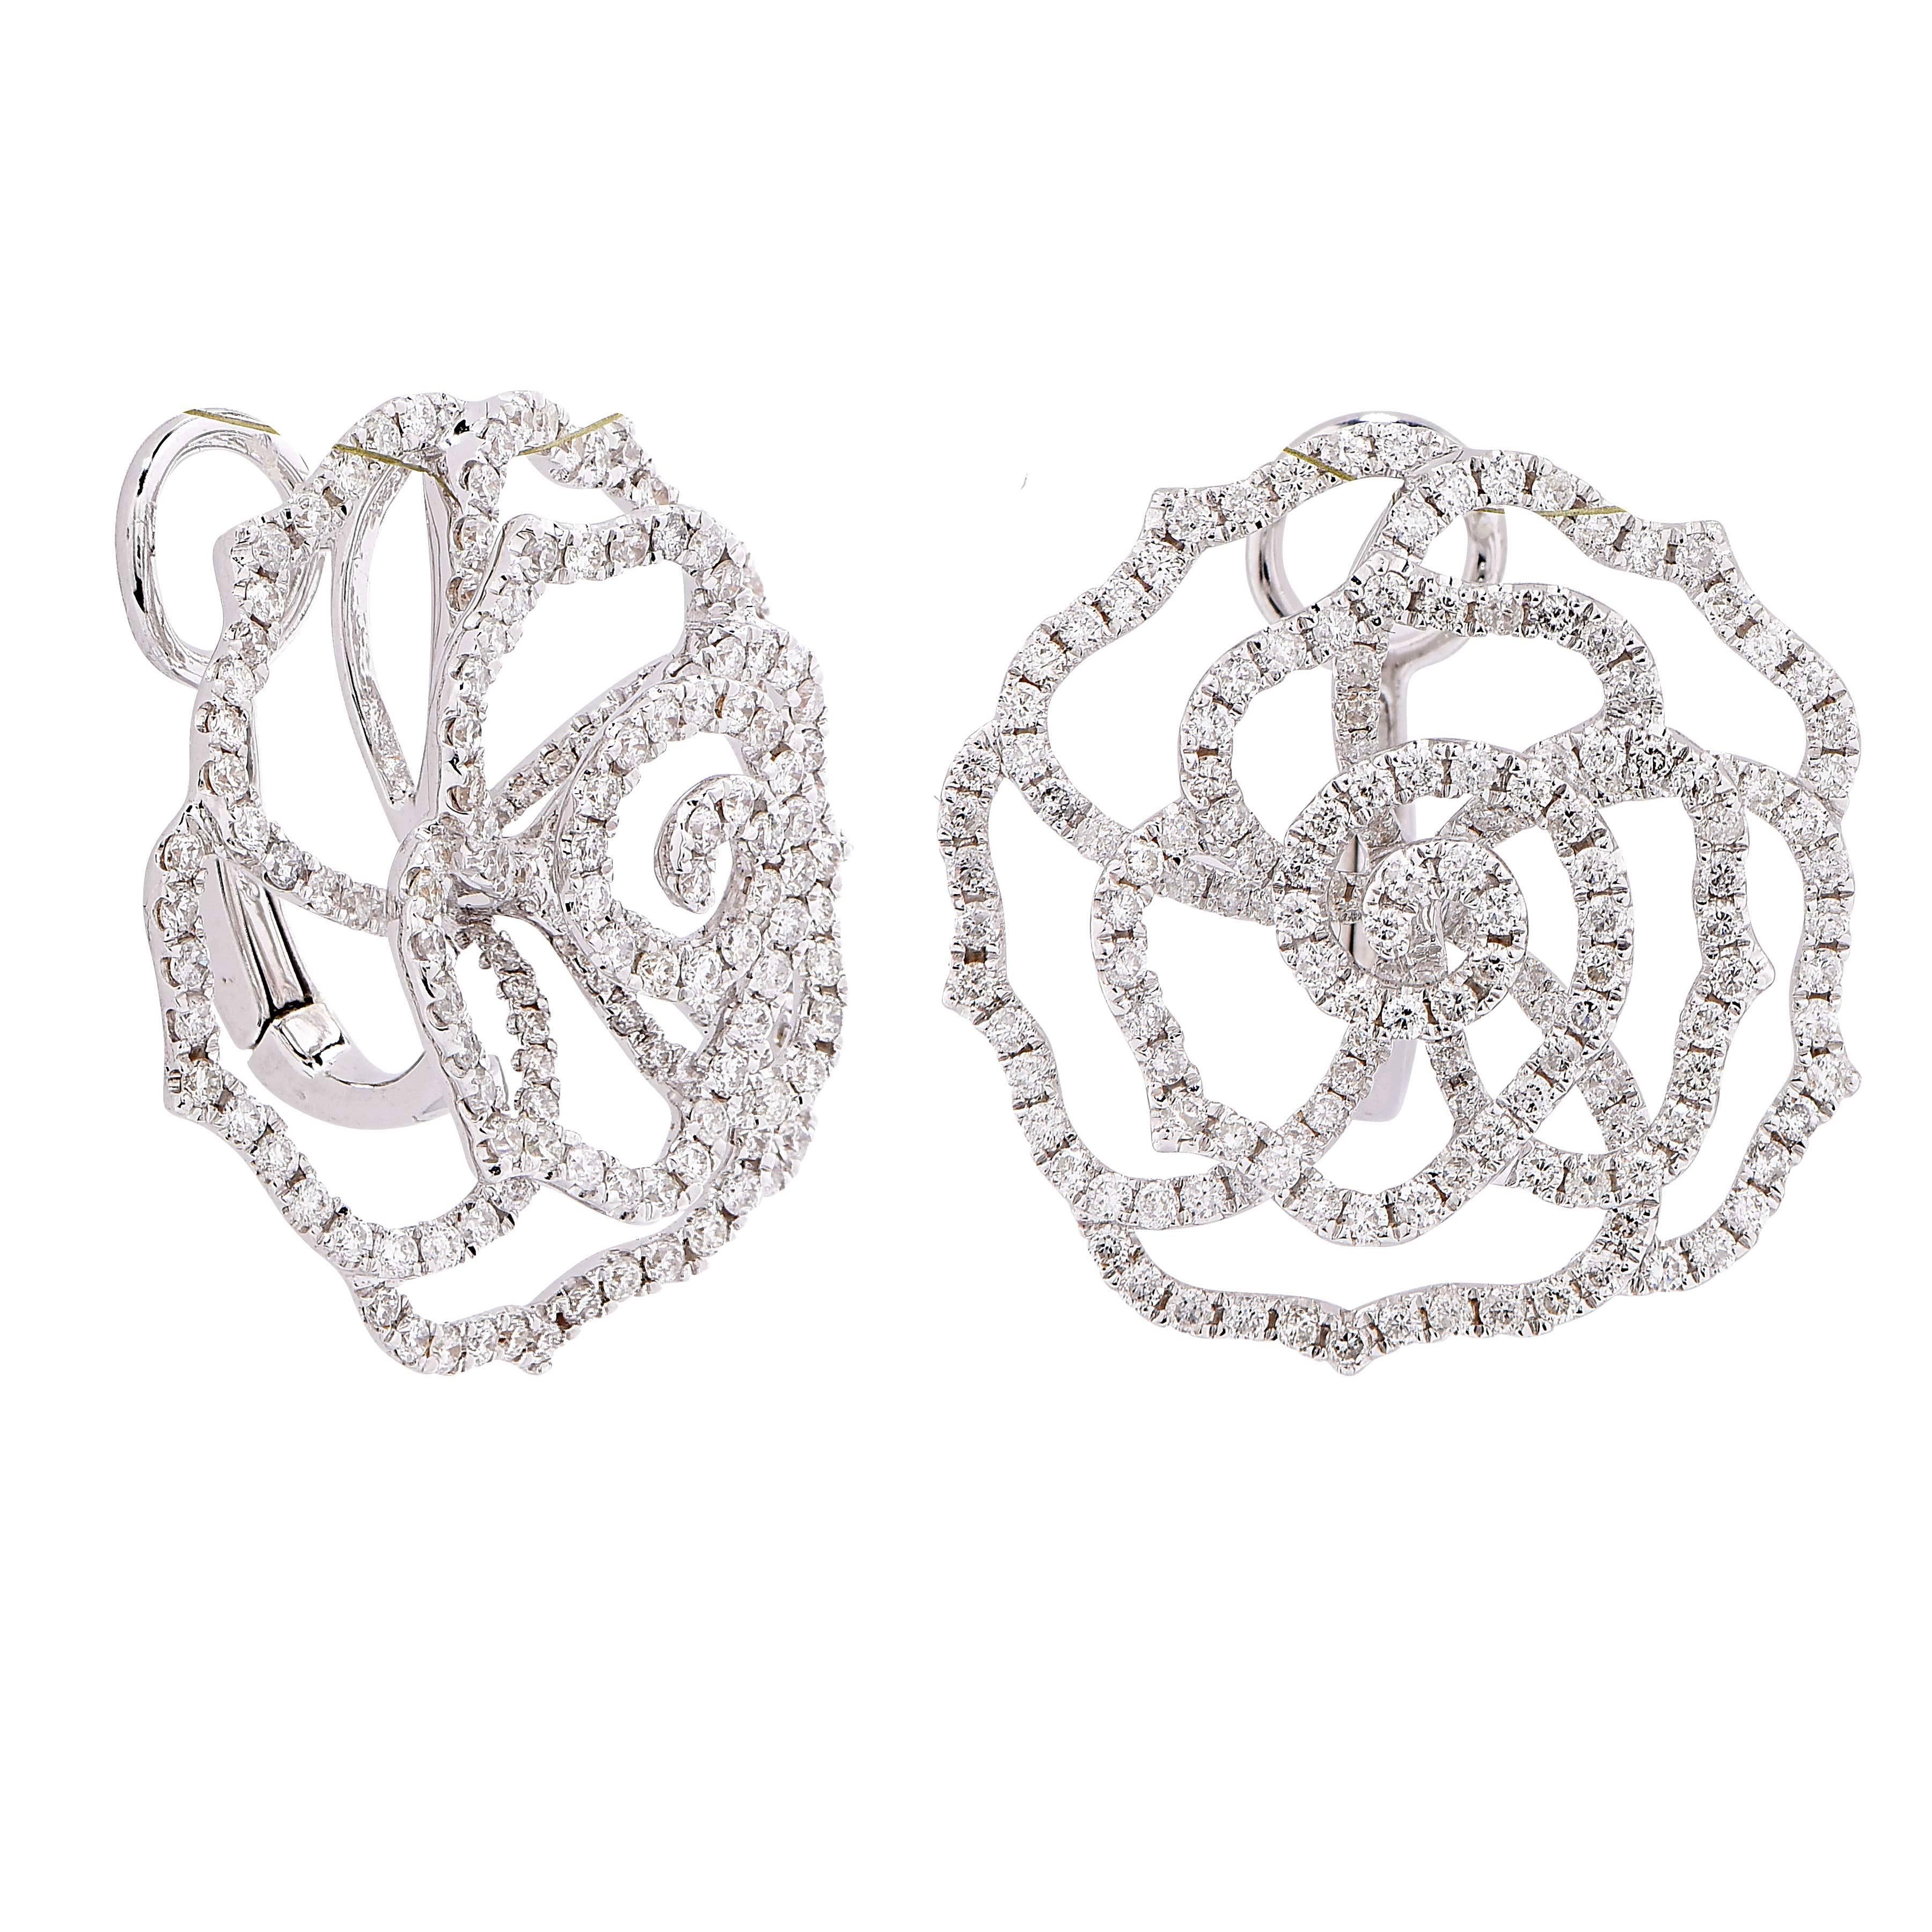 These modern rose shaped diamond earrings feature 348 single cut diamonds with an estimated total weight of 2.20 carats set in 18kt white gold.

Metal Type: 18Kt White Gold
Metal Weight: 8.5 Grams